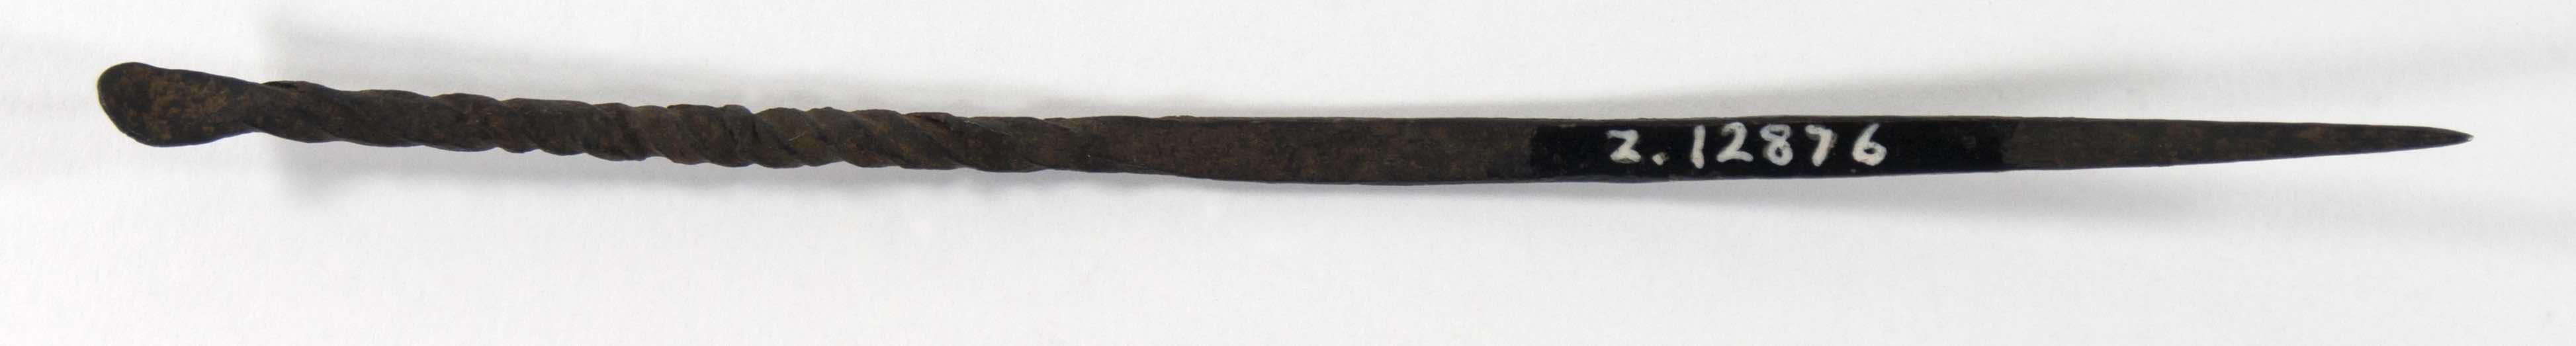 Iron hairpin formed of a long, cylindrical rod